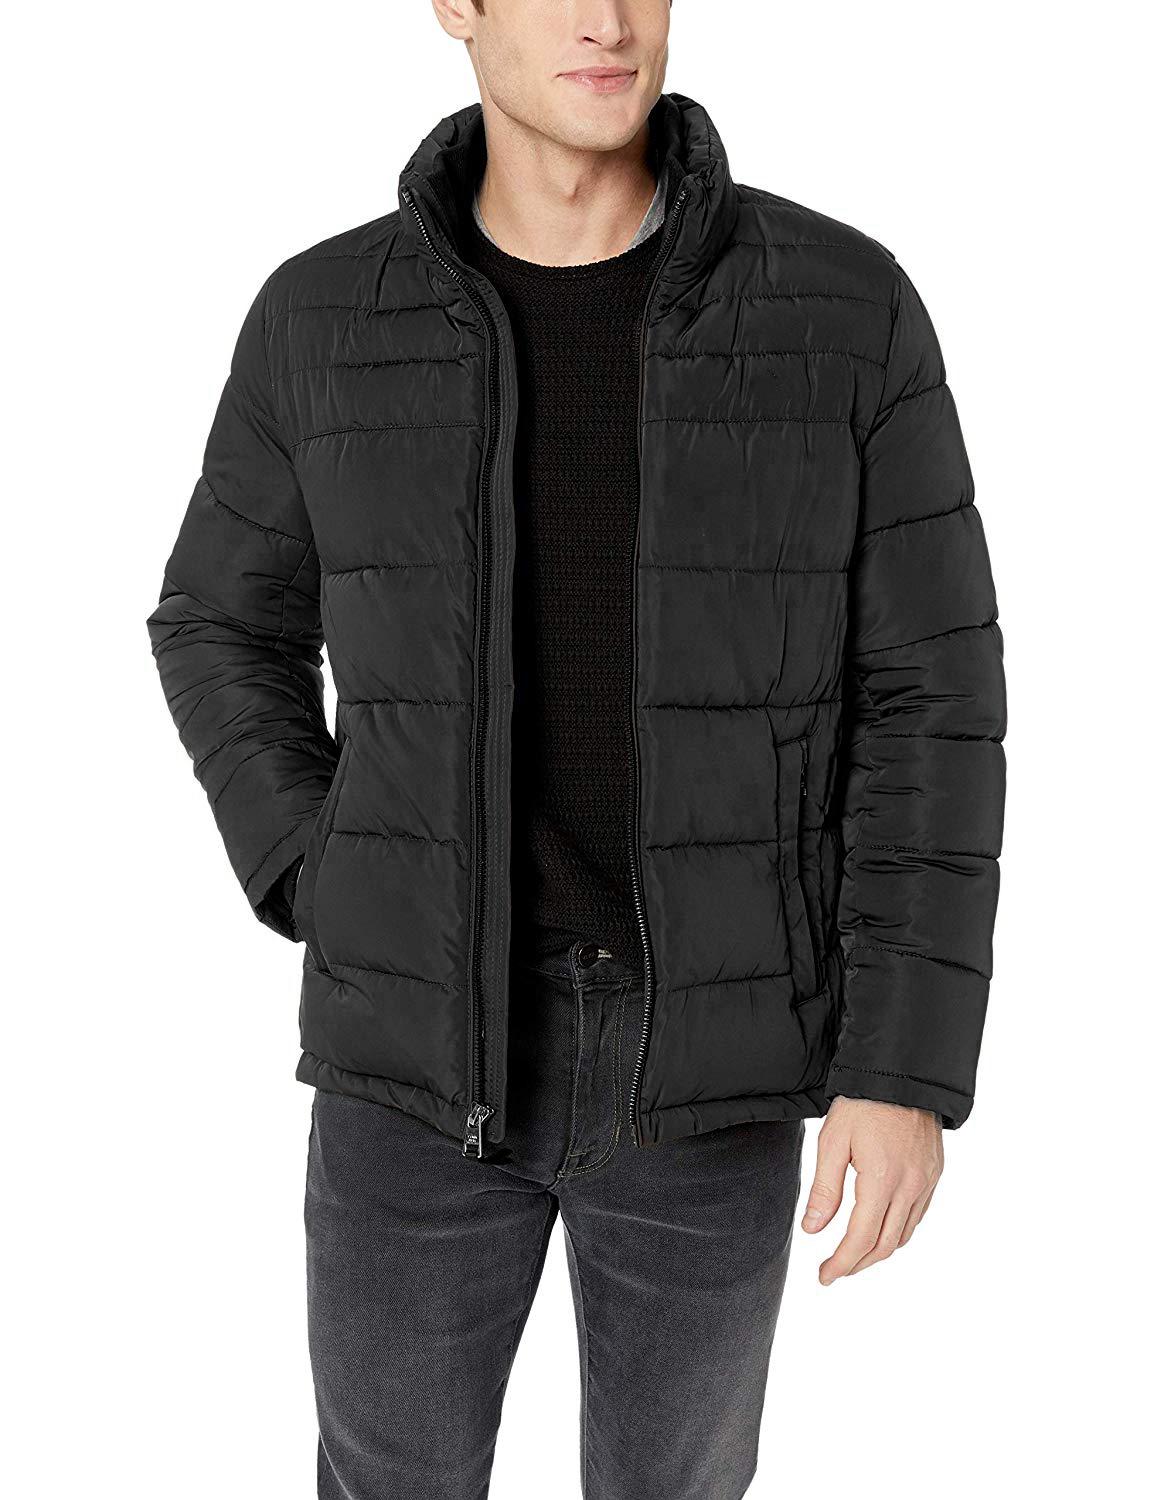 Black Puffer Jacket For Men Price in Pakistan - View Latest Collection ...